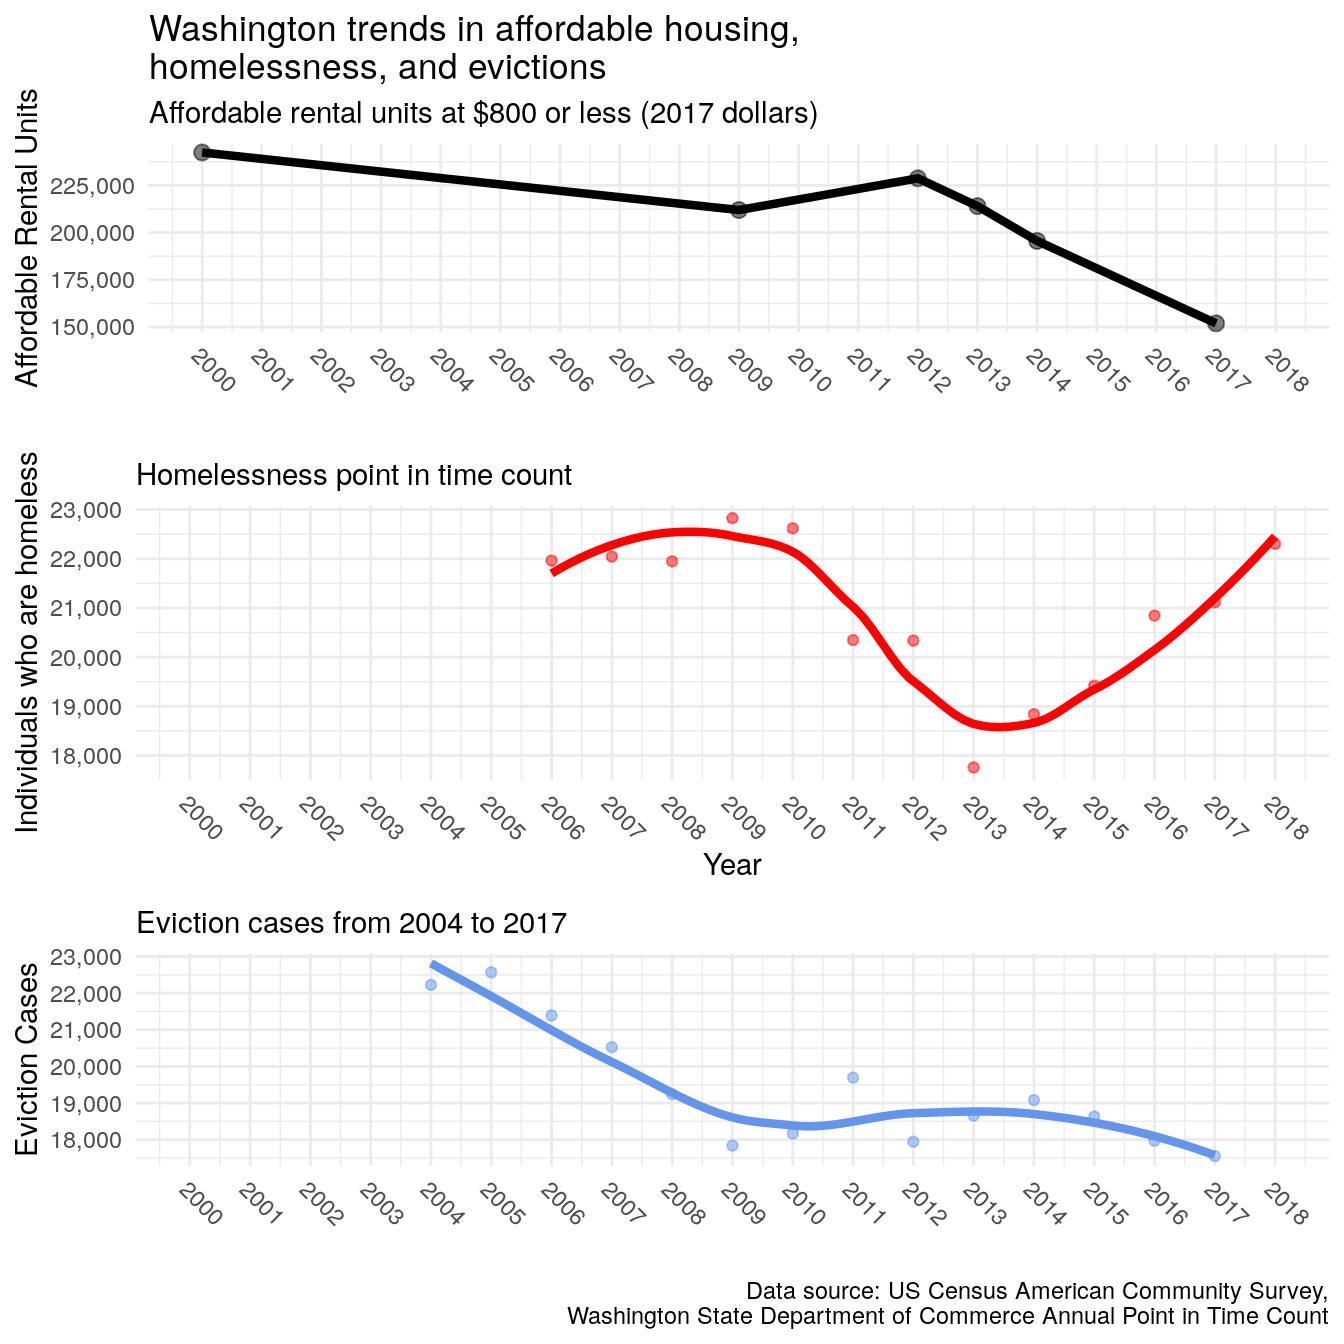 Trends in affordable housing, homelessness, and evictions for Washington State